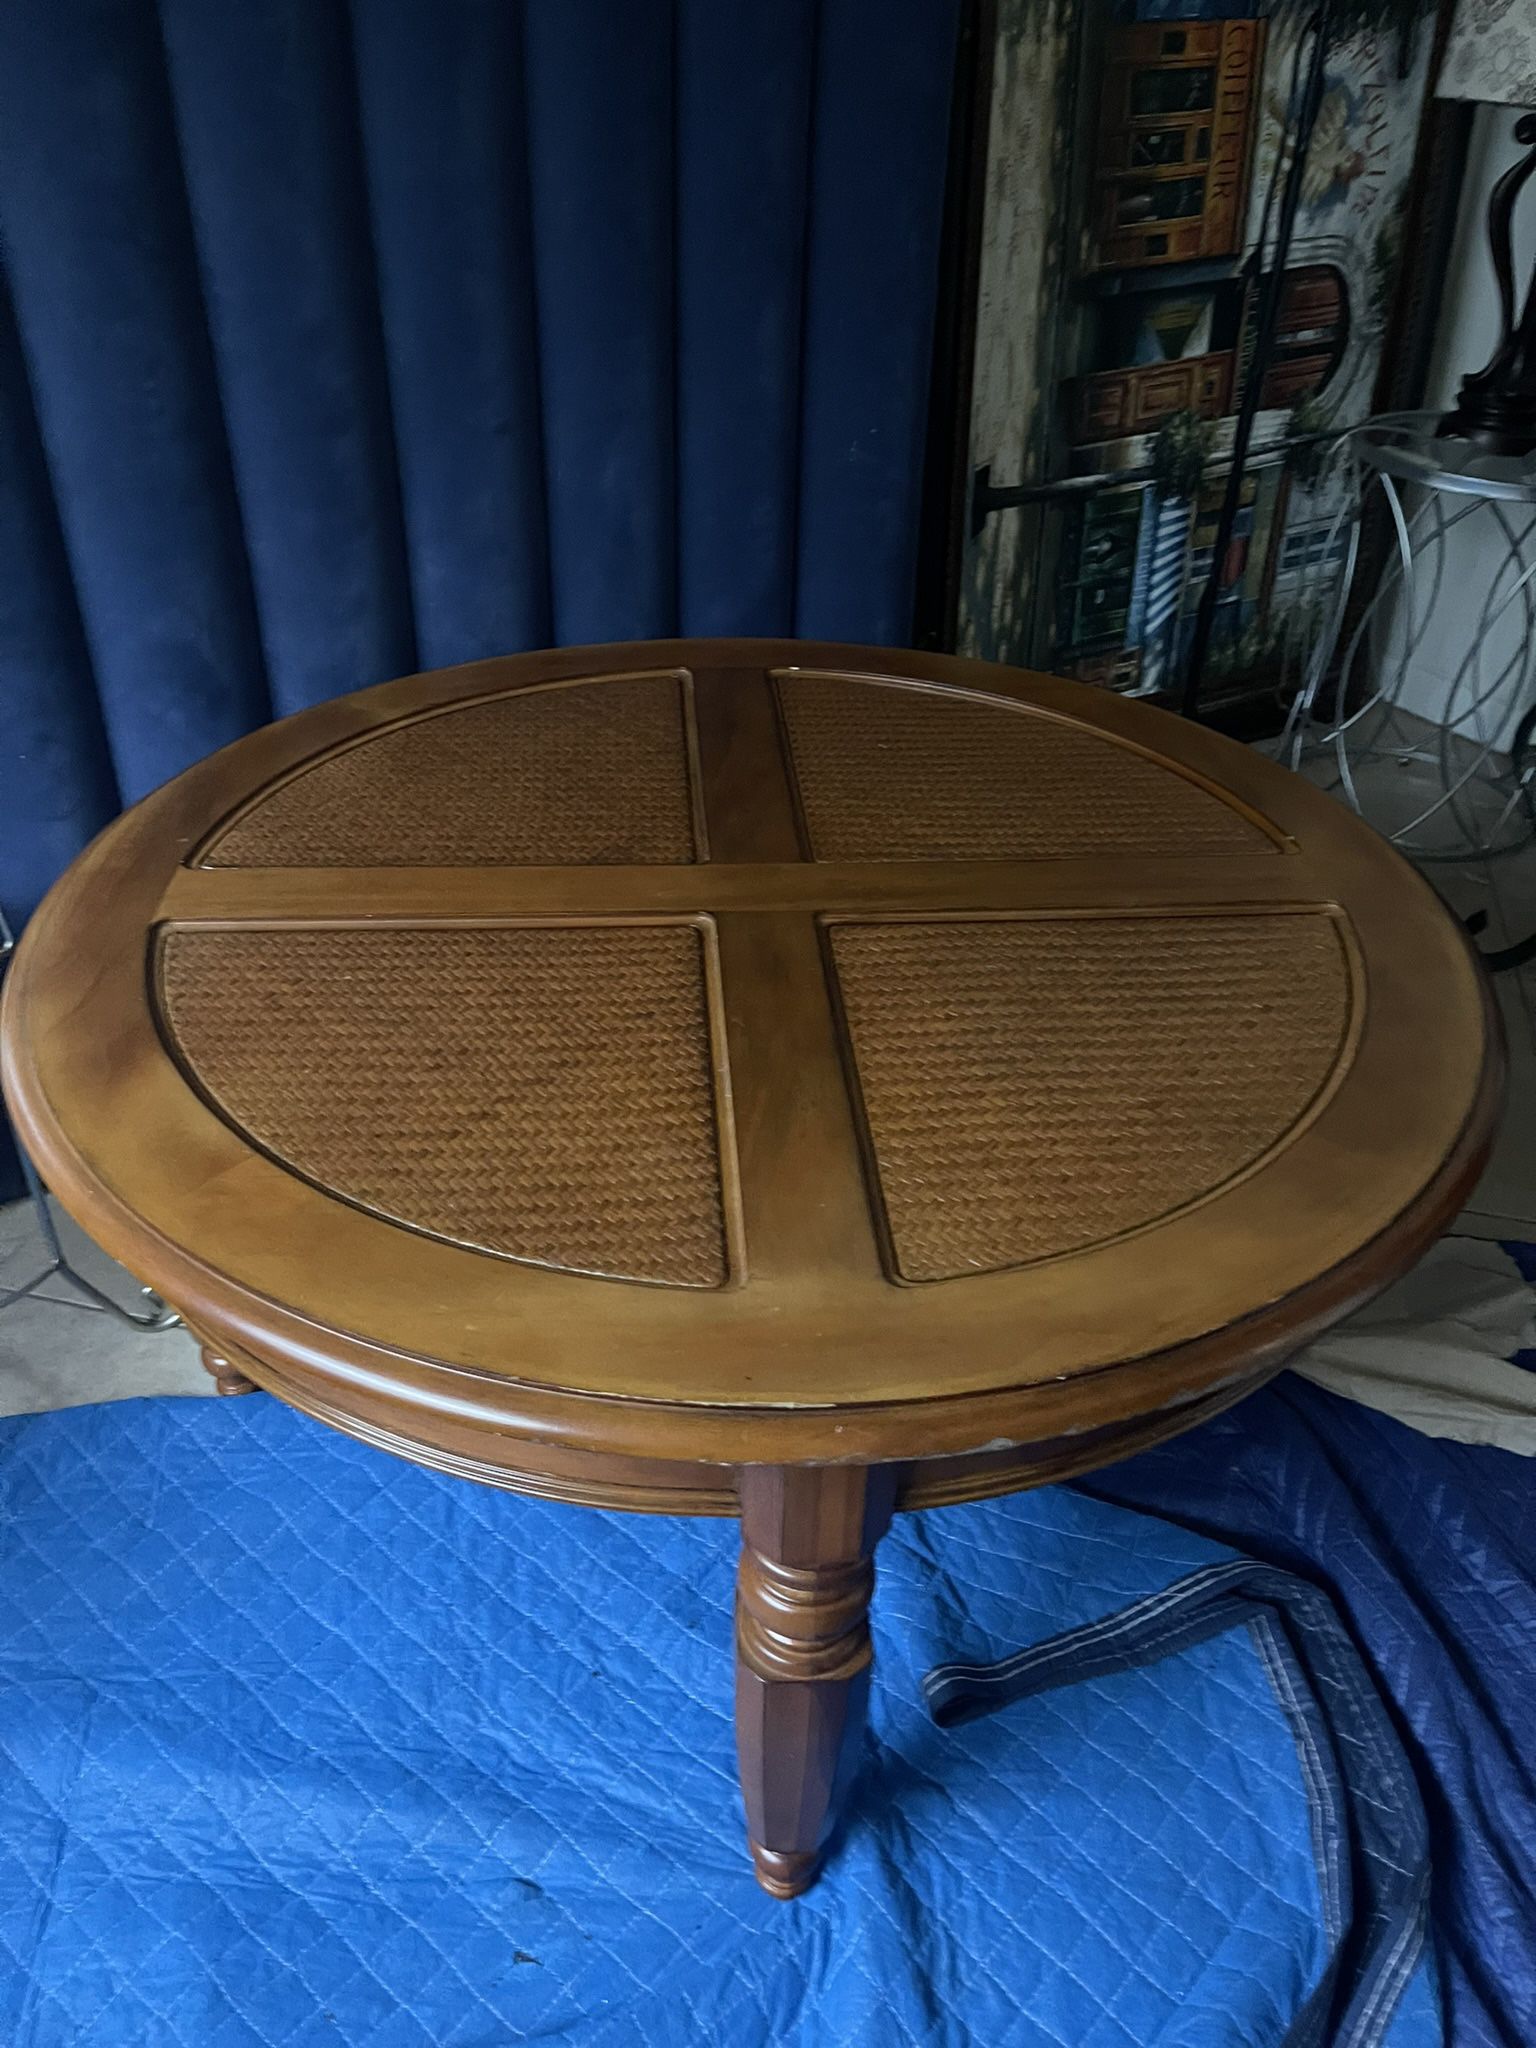 Small Coffee Table - $15